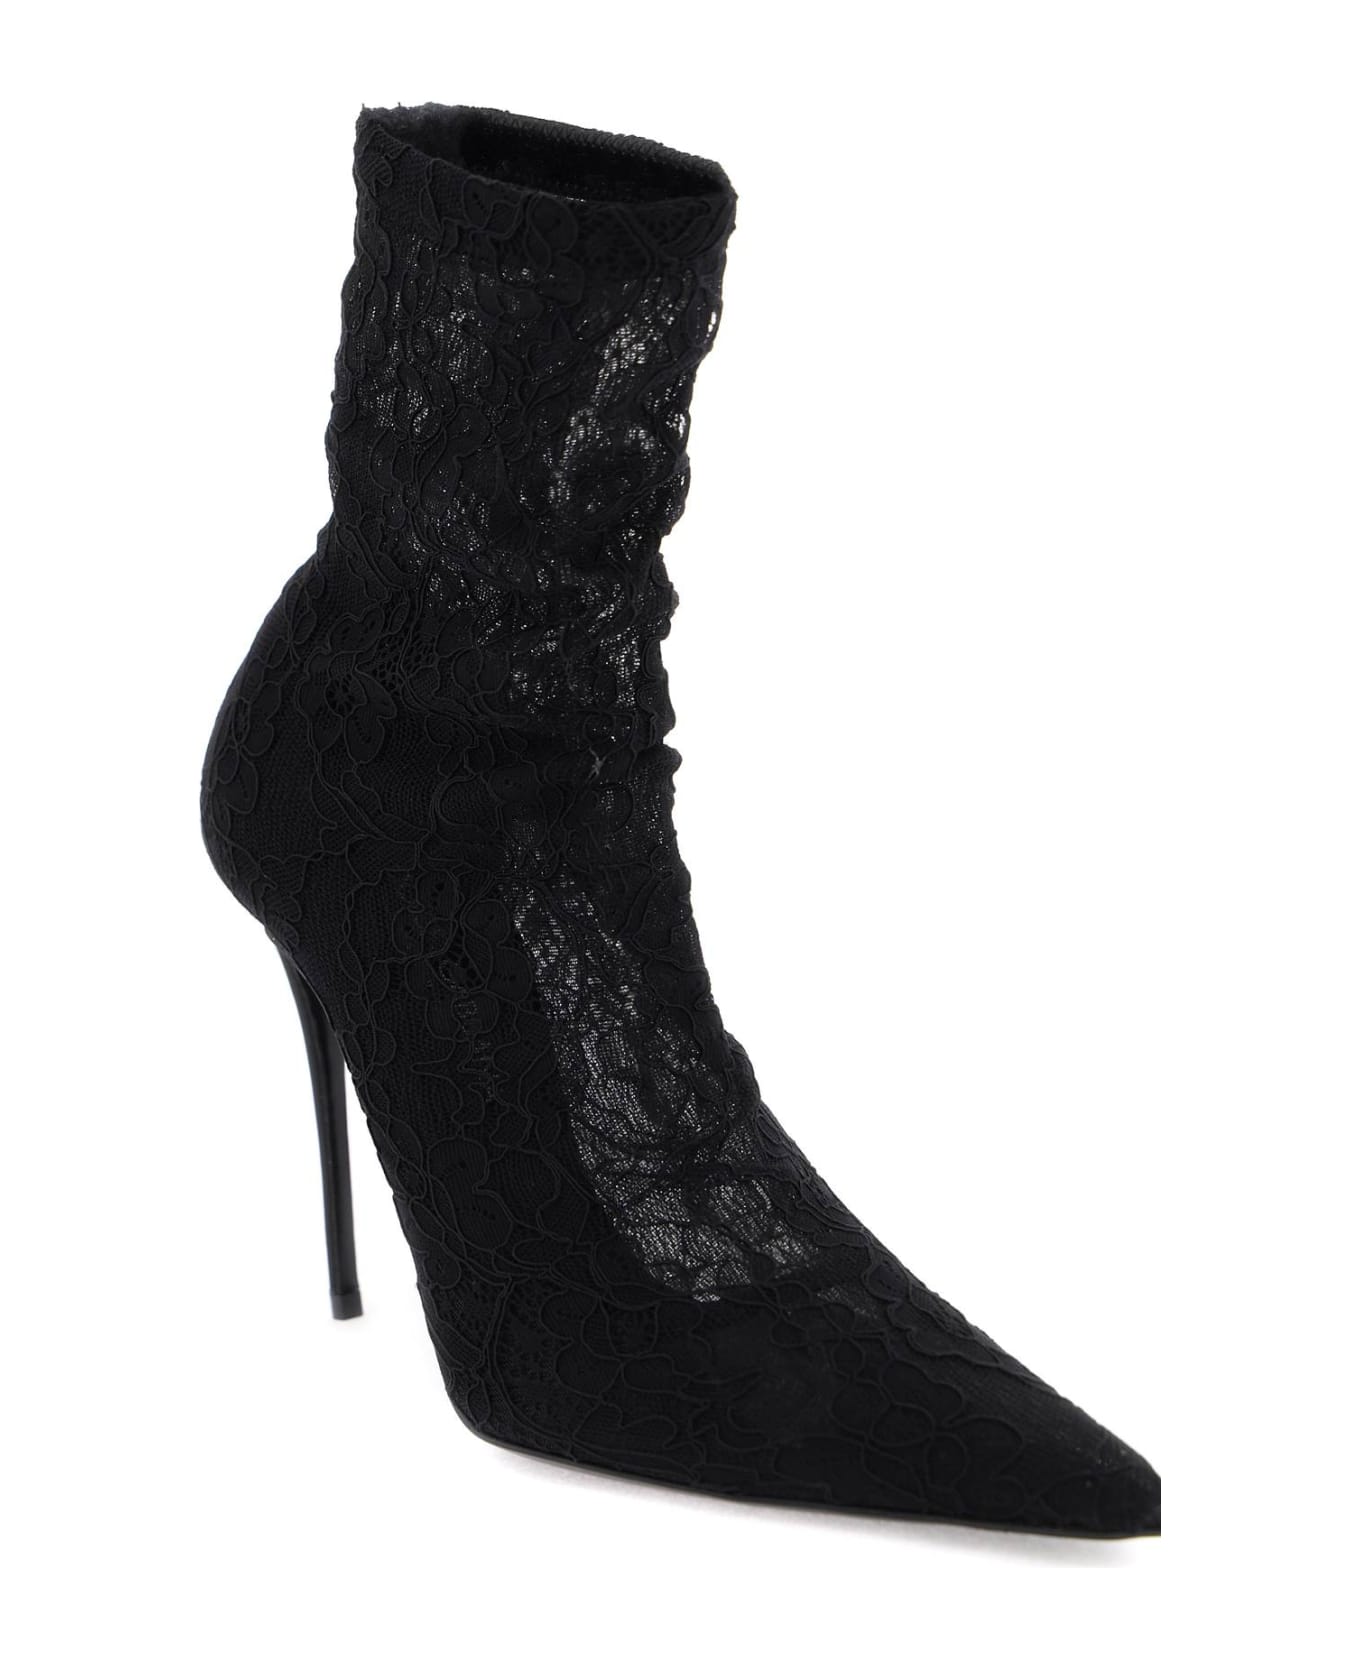 Dolce & Gabbana Lace Ankle Boots - Black